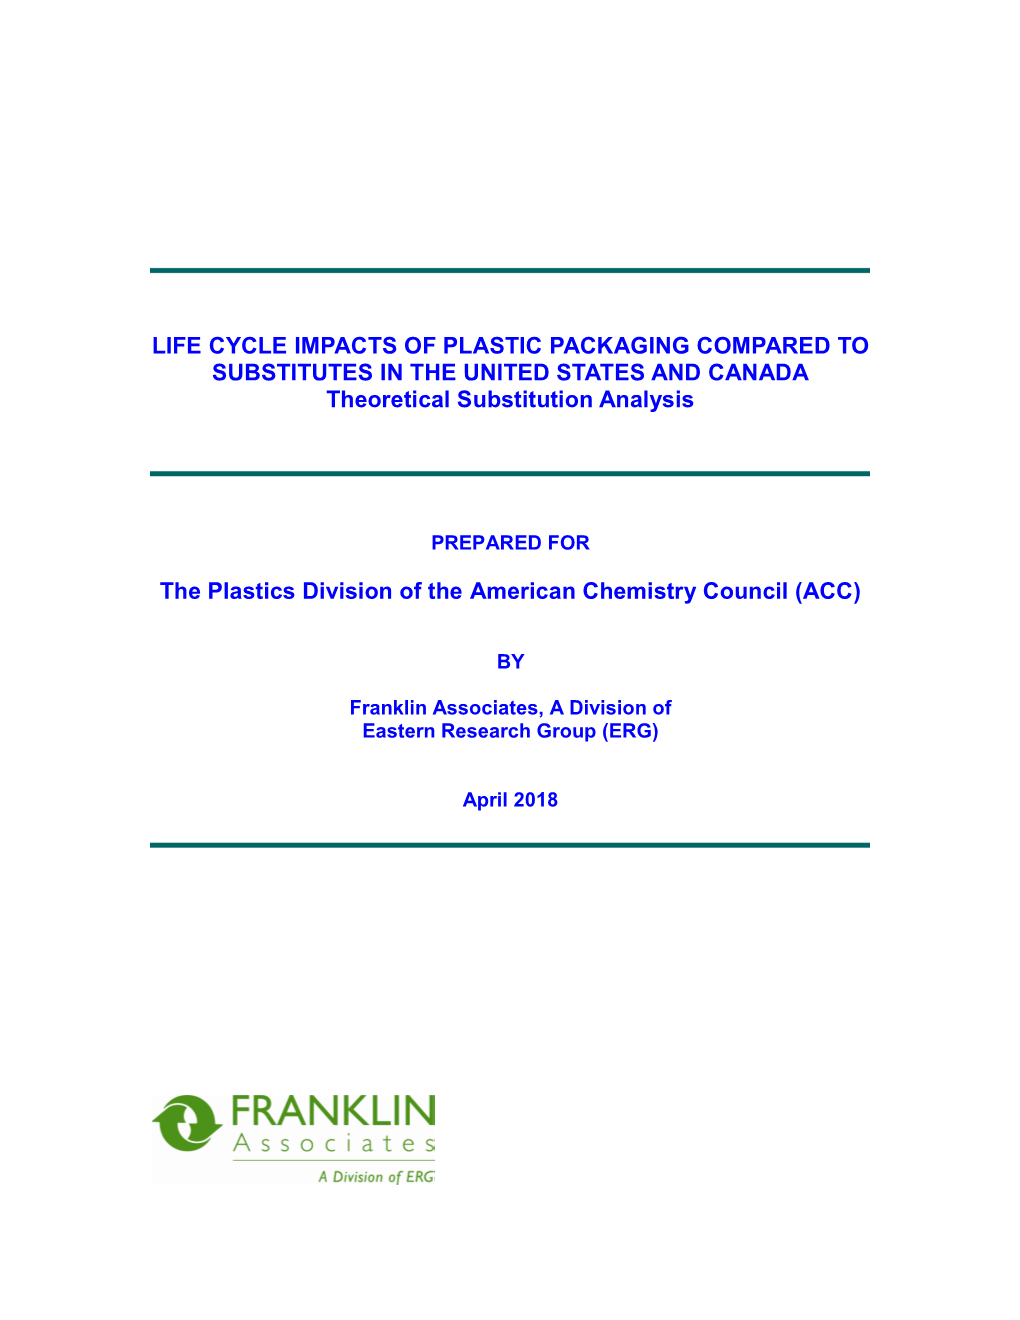 LIFE CYCLE IMPACTS of PLASTIC PACKAGING COMPARED to SUBSTITUTES in the UNITED STATES and CANADA Theoretical Substitution Analysis